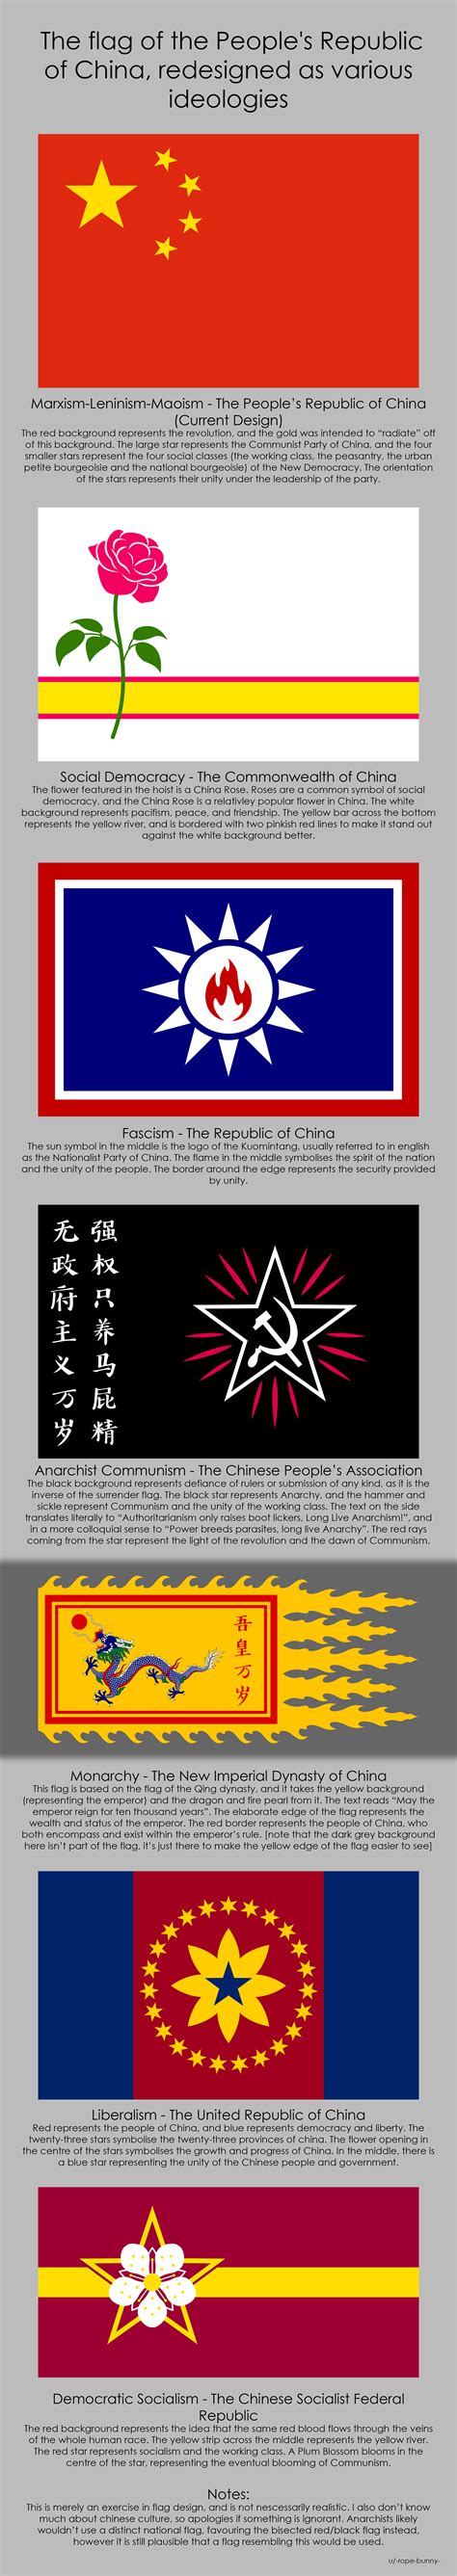 The Flag Of China Redesigned As Various Ideologies Rvexillology